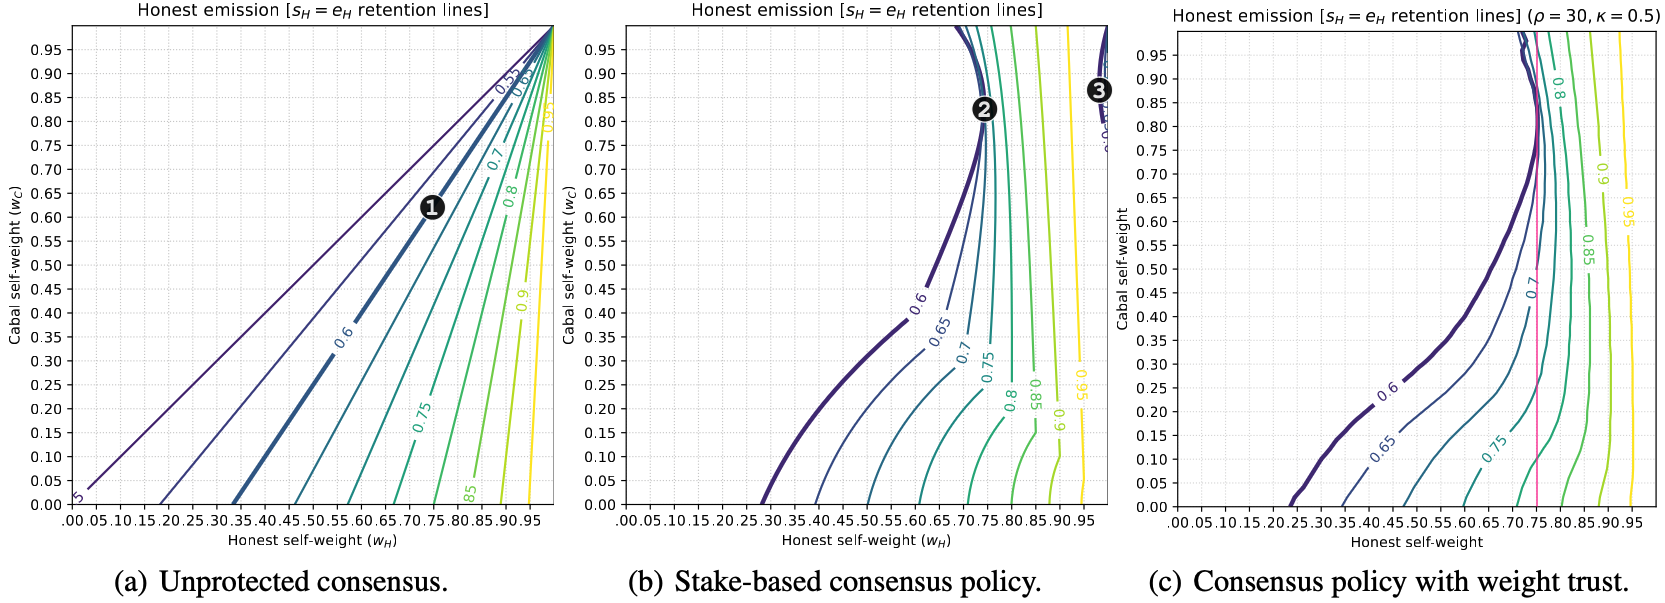 Emission of newly minted token vector E through subnet incentive mechanisms.